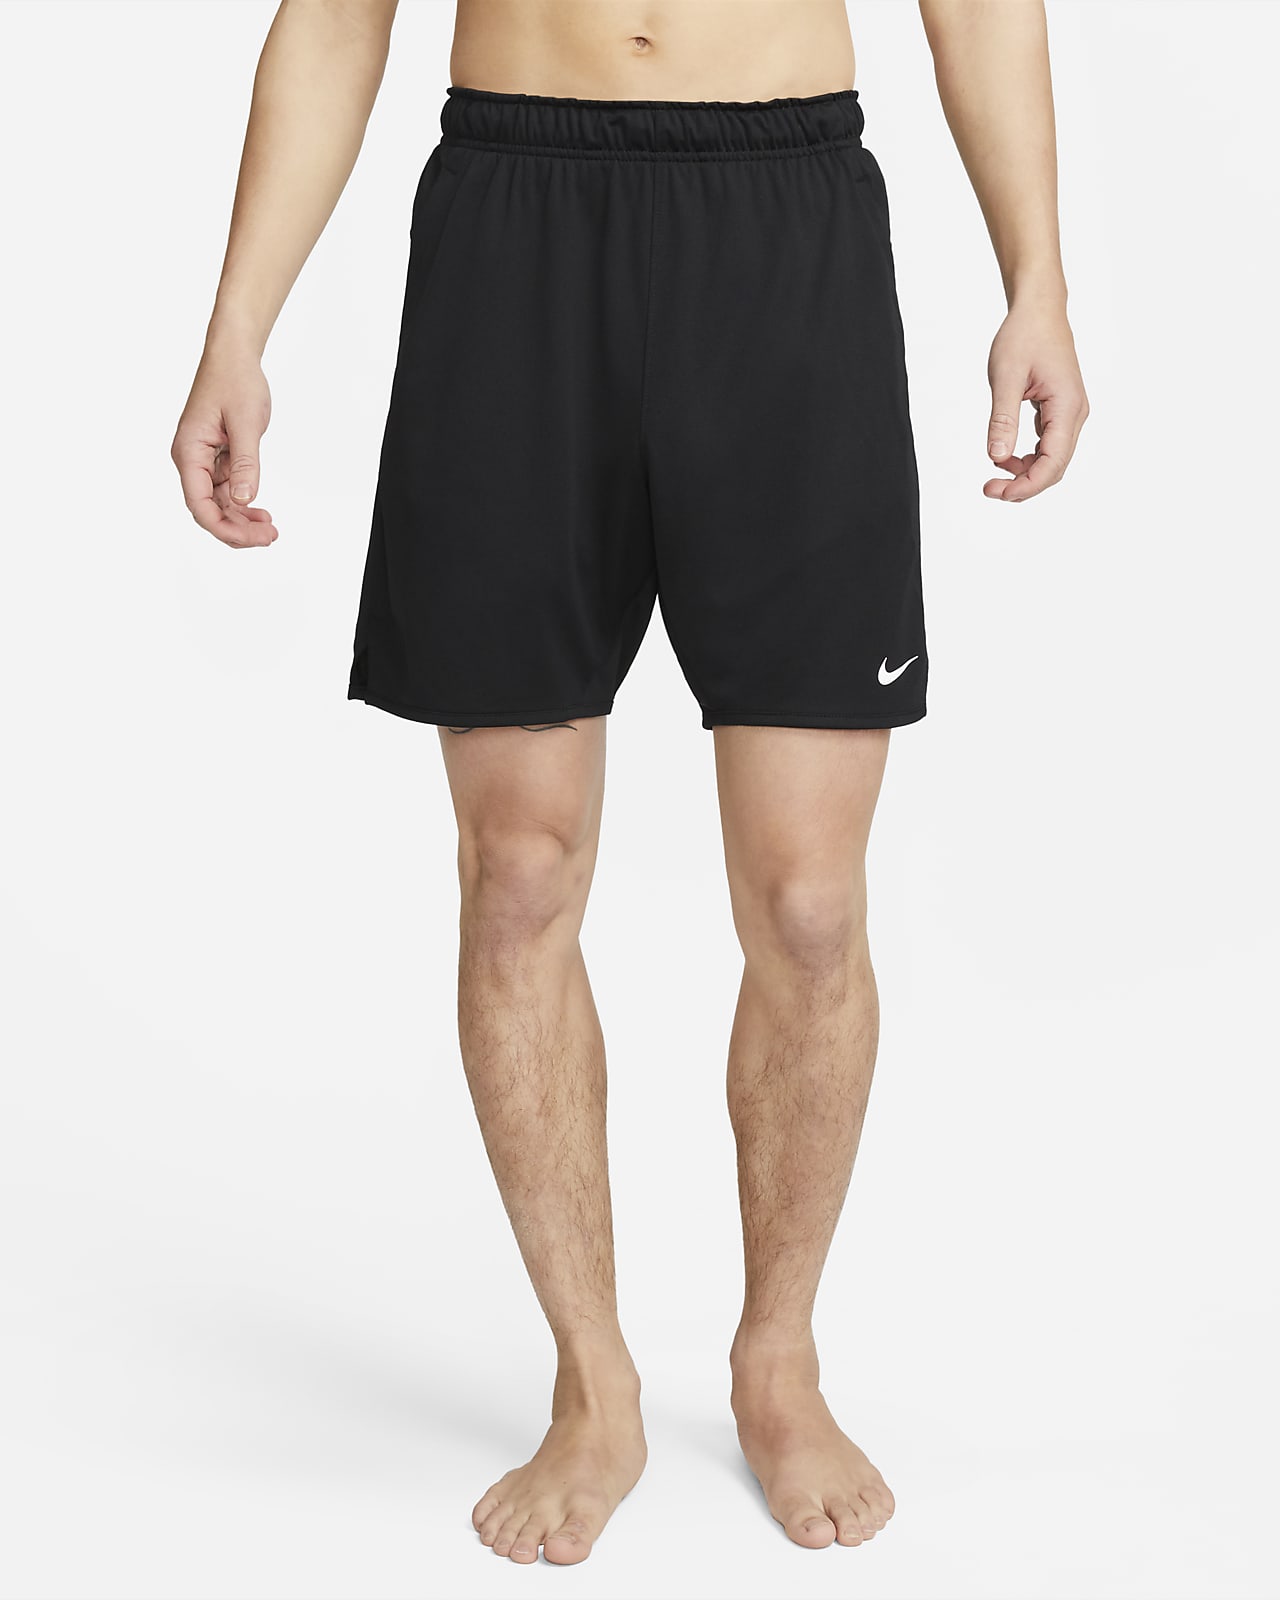 Nike Dri-FIT Totality Men's 18cm (approx.) Unlined Shorts